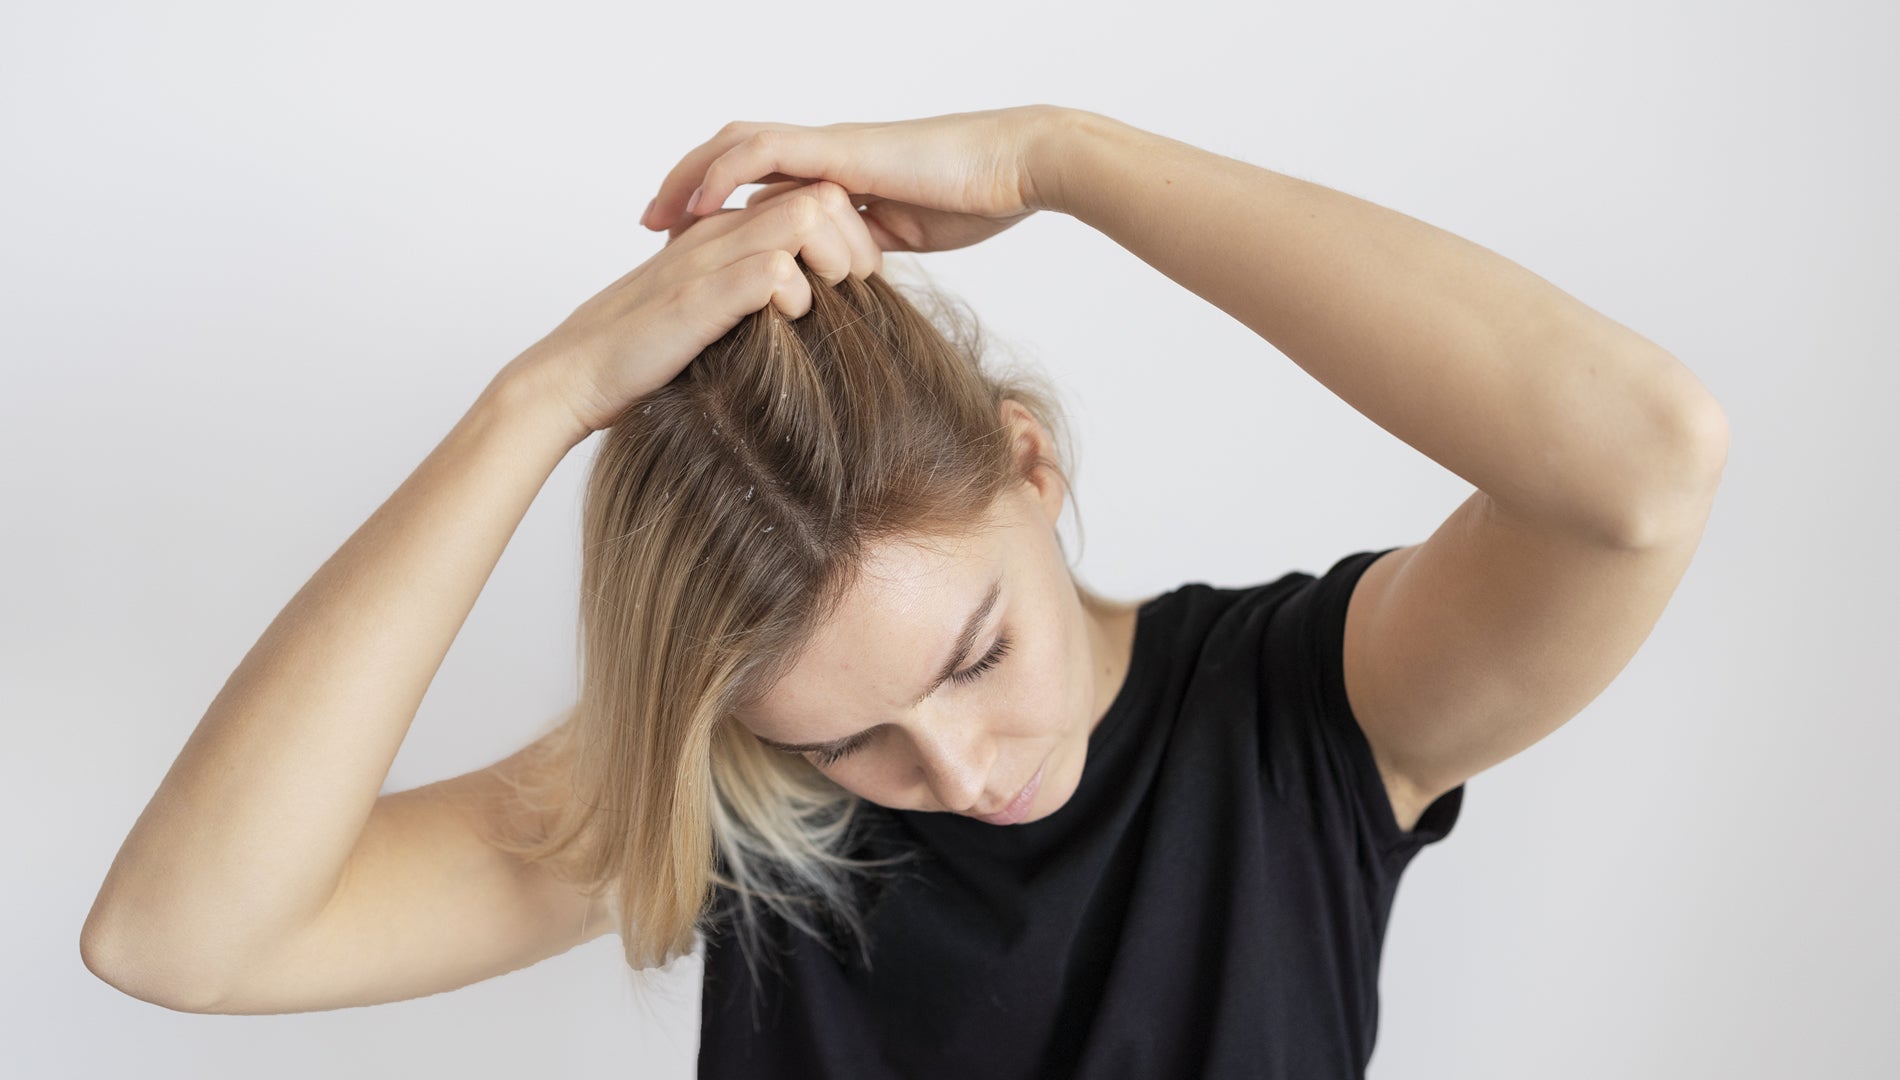 Woman showing Dandruff and Itchy Scalp